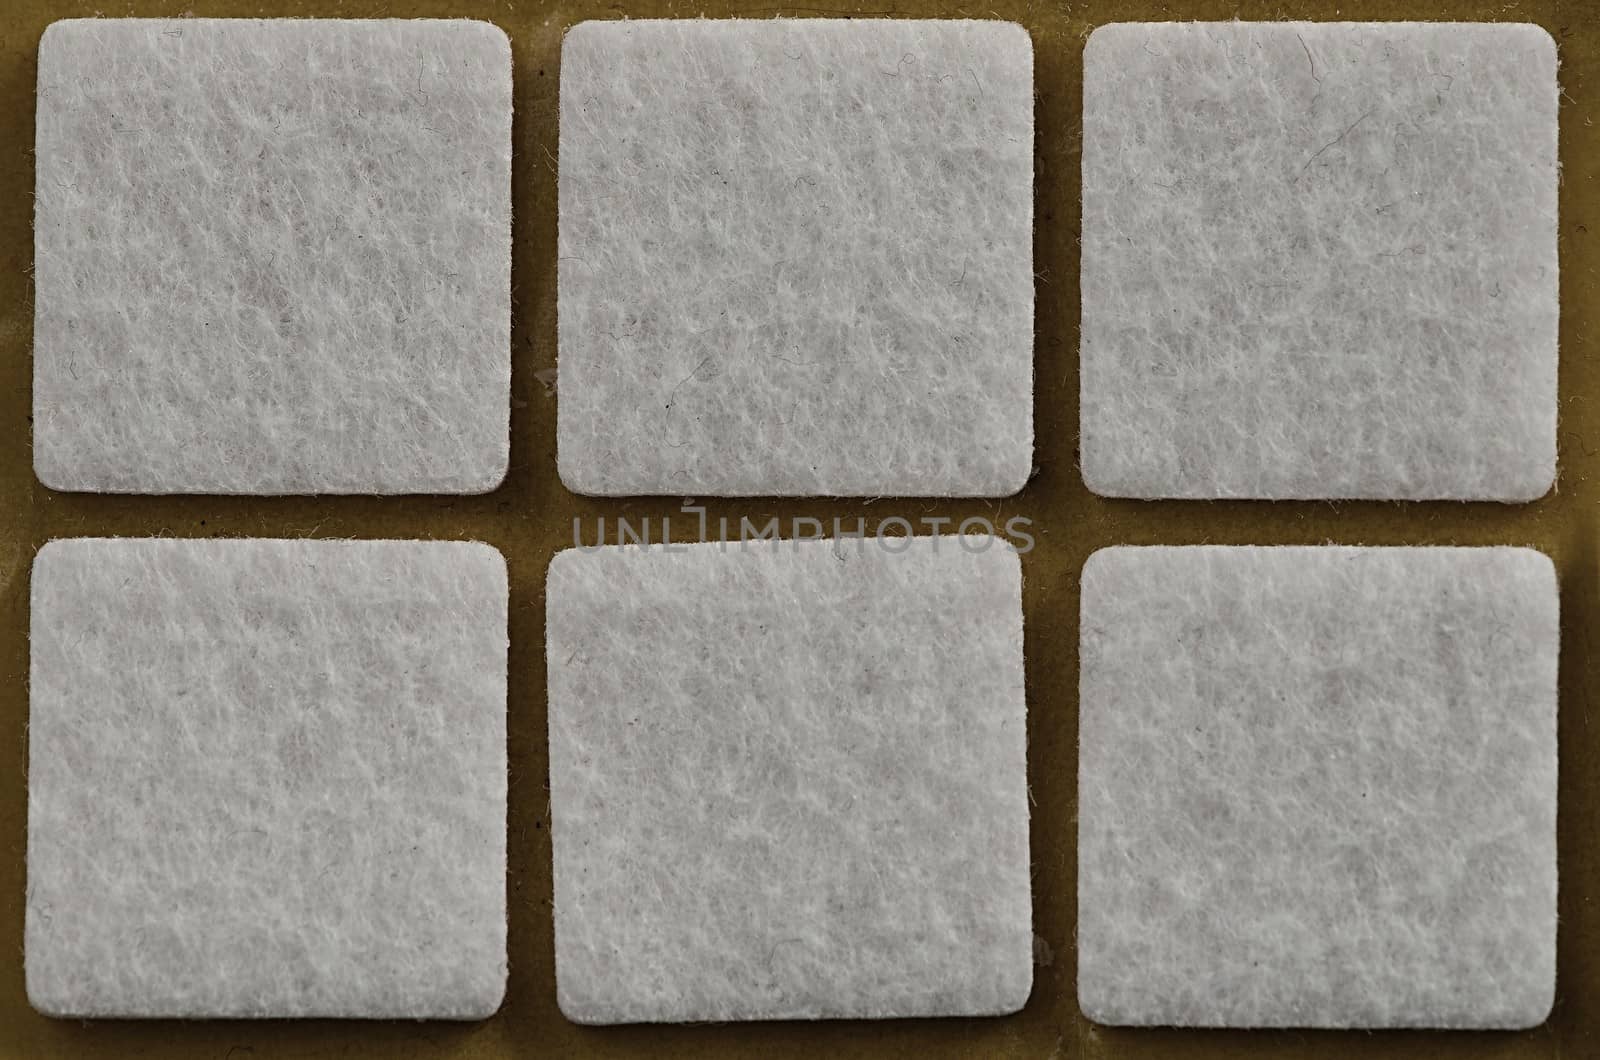 six white squares on a beige background 